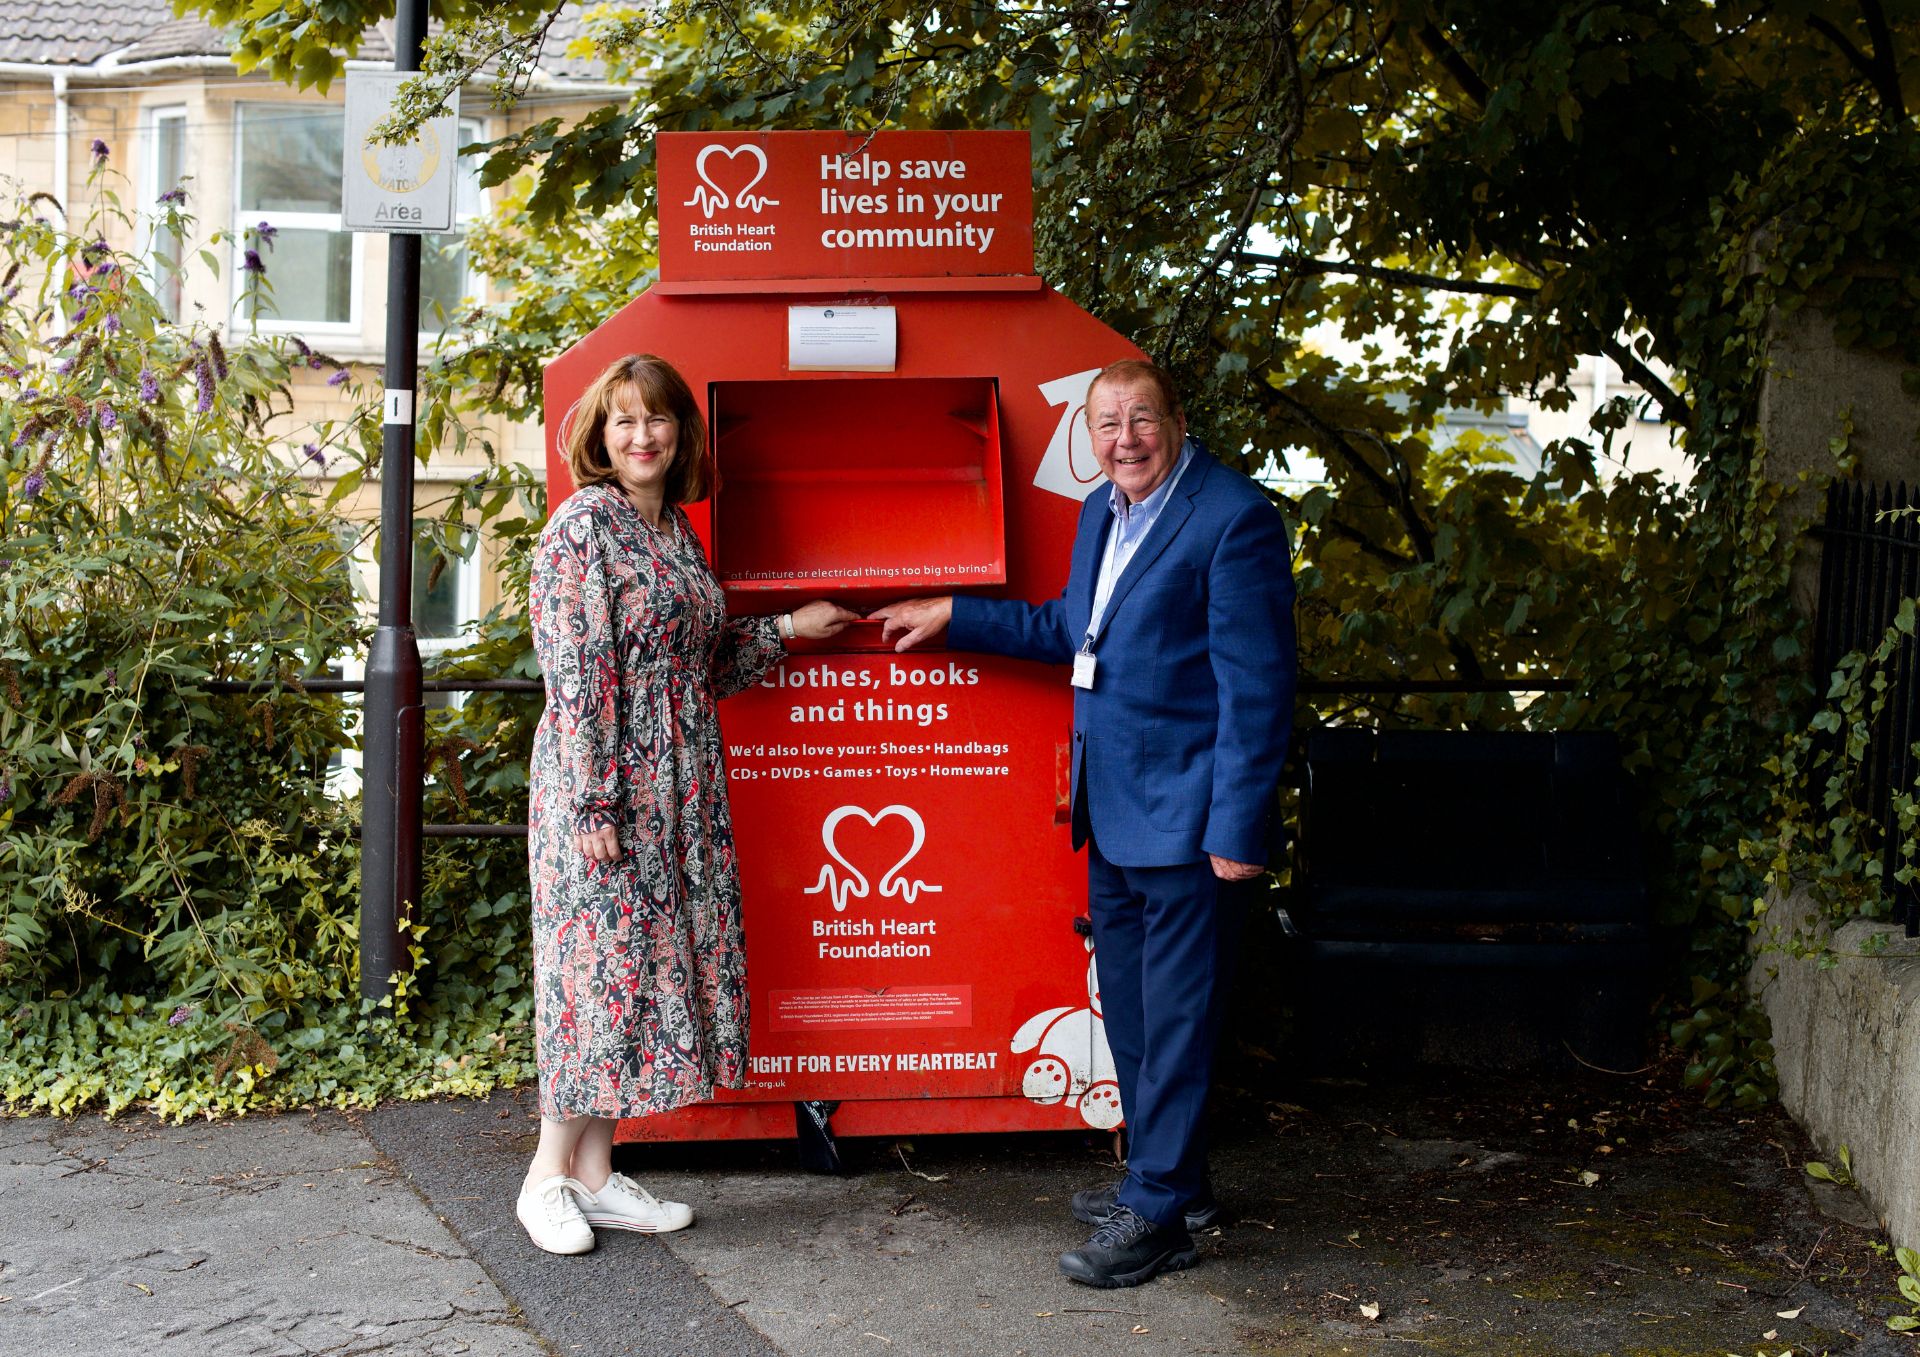 Photo of man and a woman standing next to a bright red collection box for textile